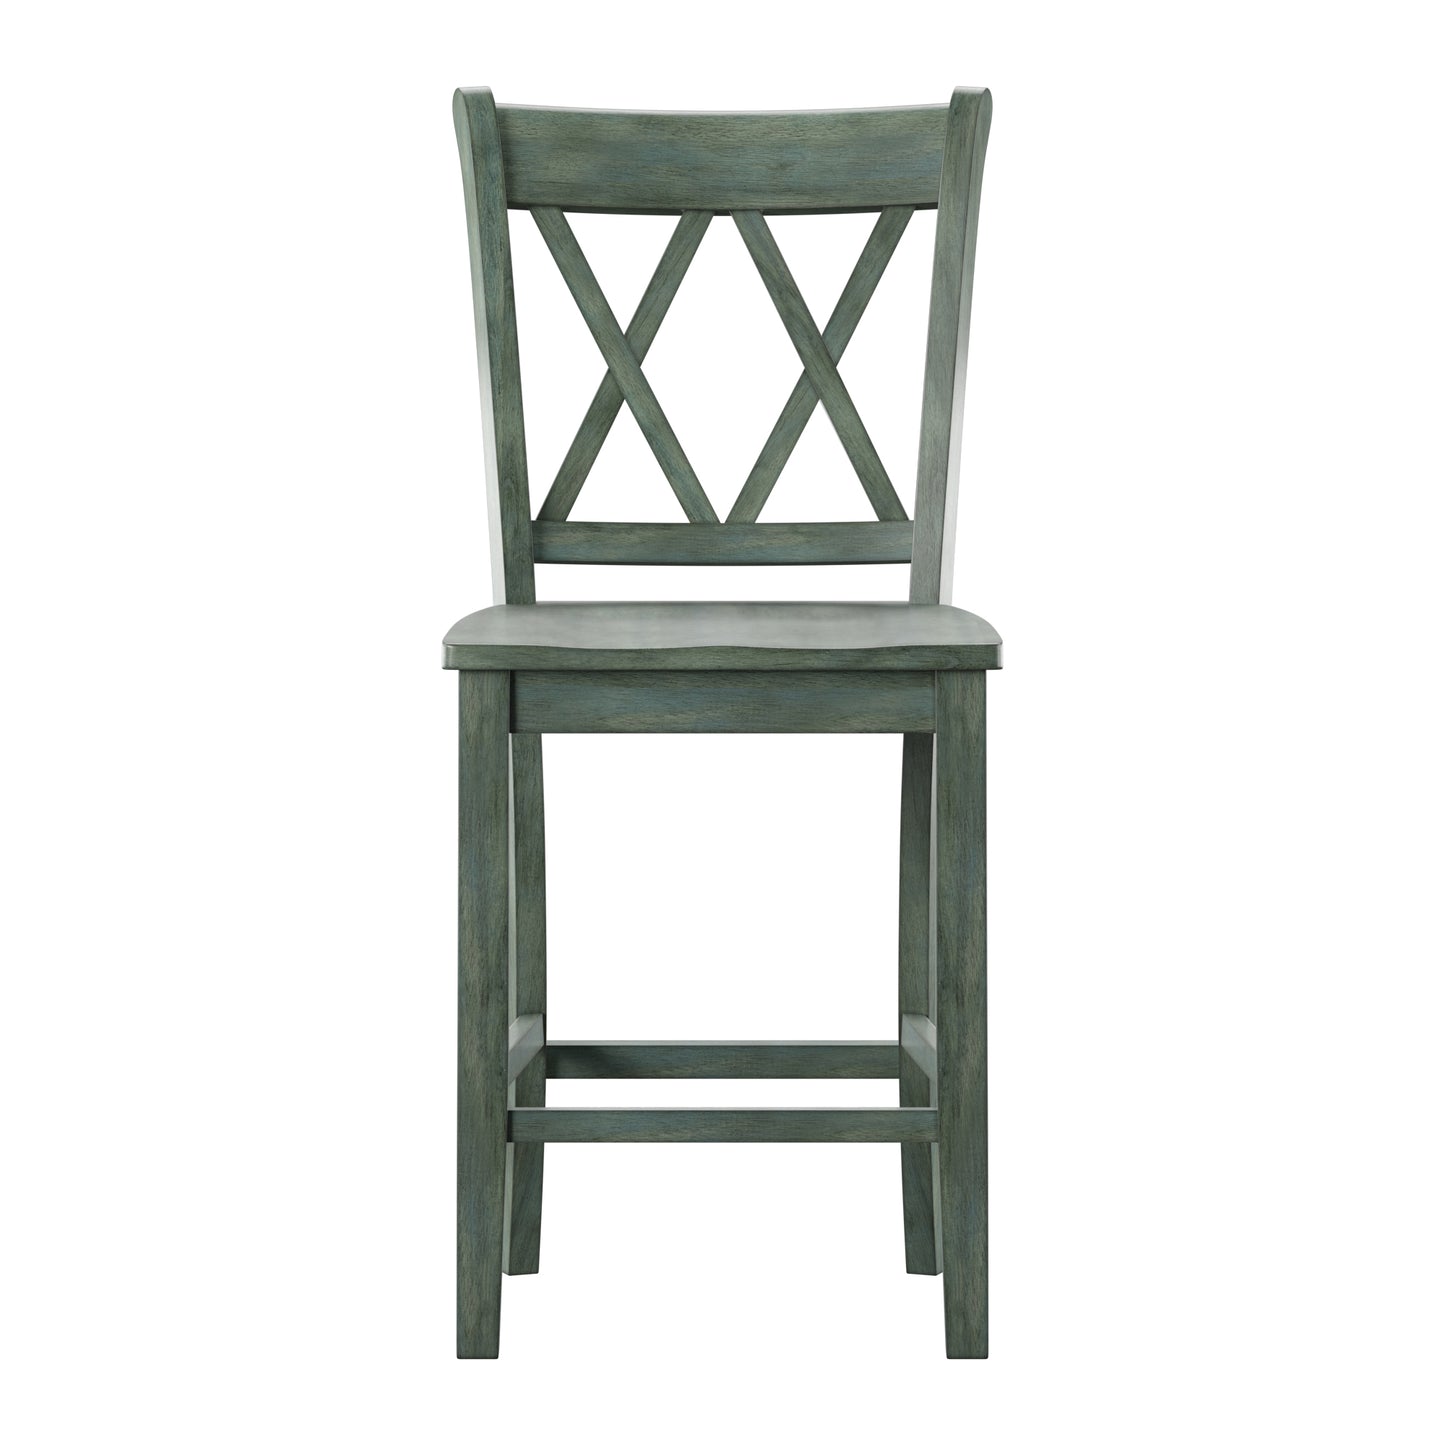 Double X-Back Counter Height Chairs (Set of 2) - Antique Sage Finish